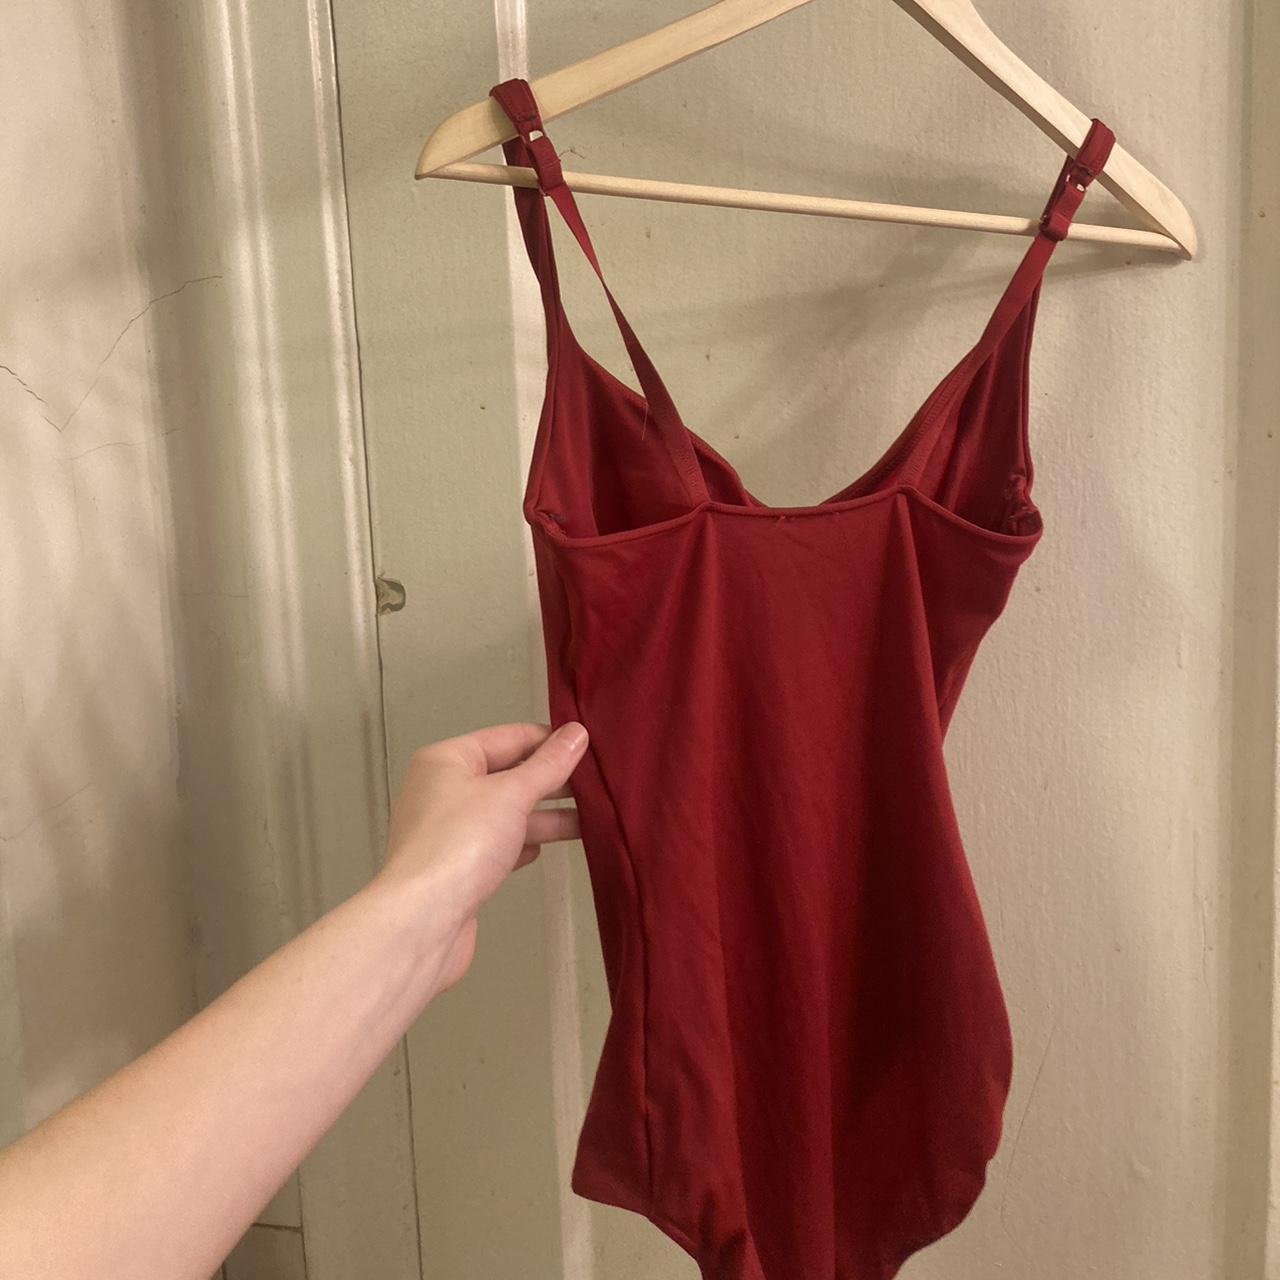 Wolford red body suit! built in bra. the material is